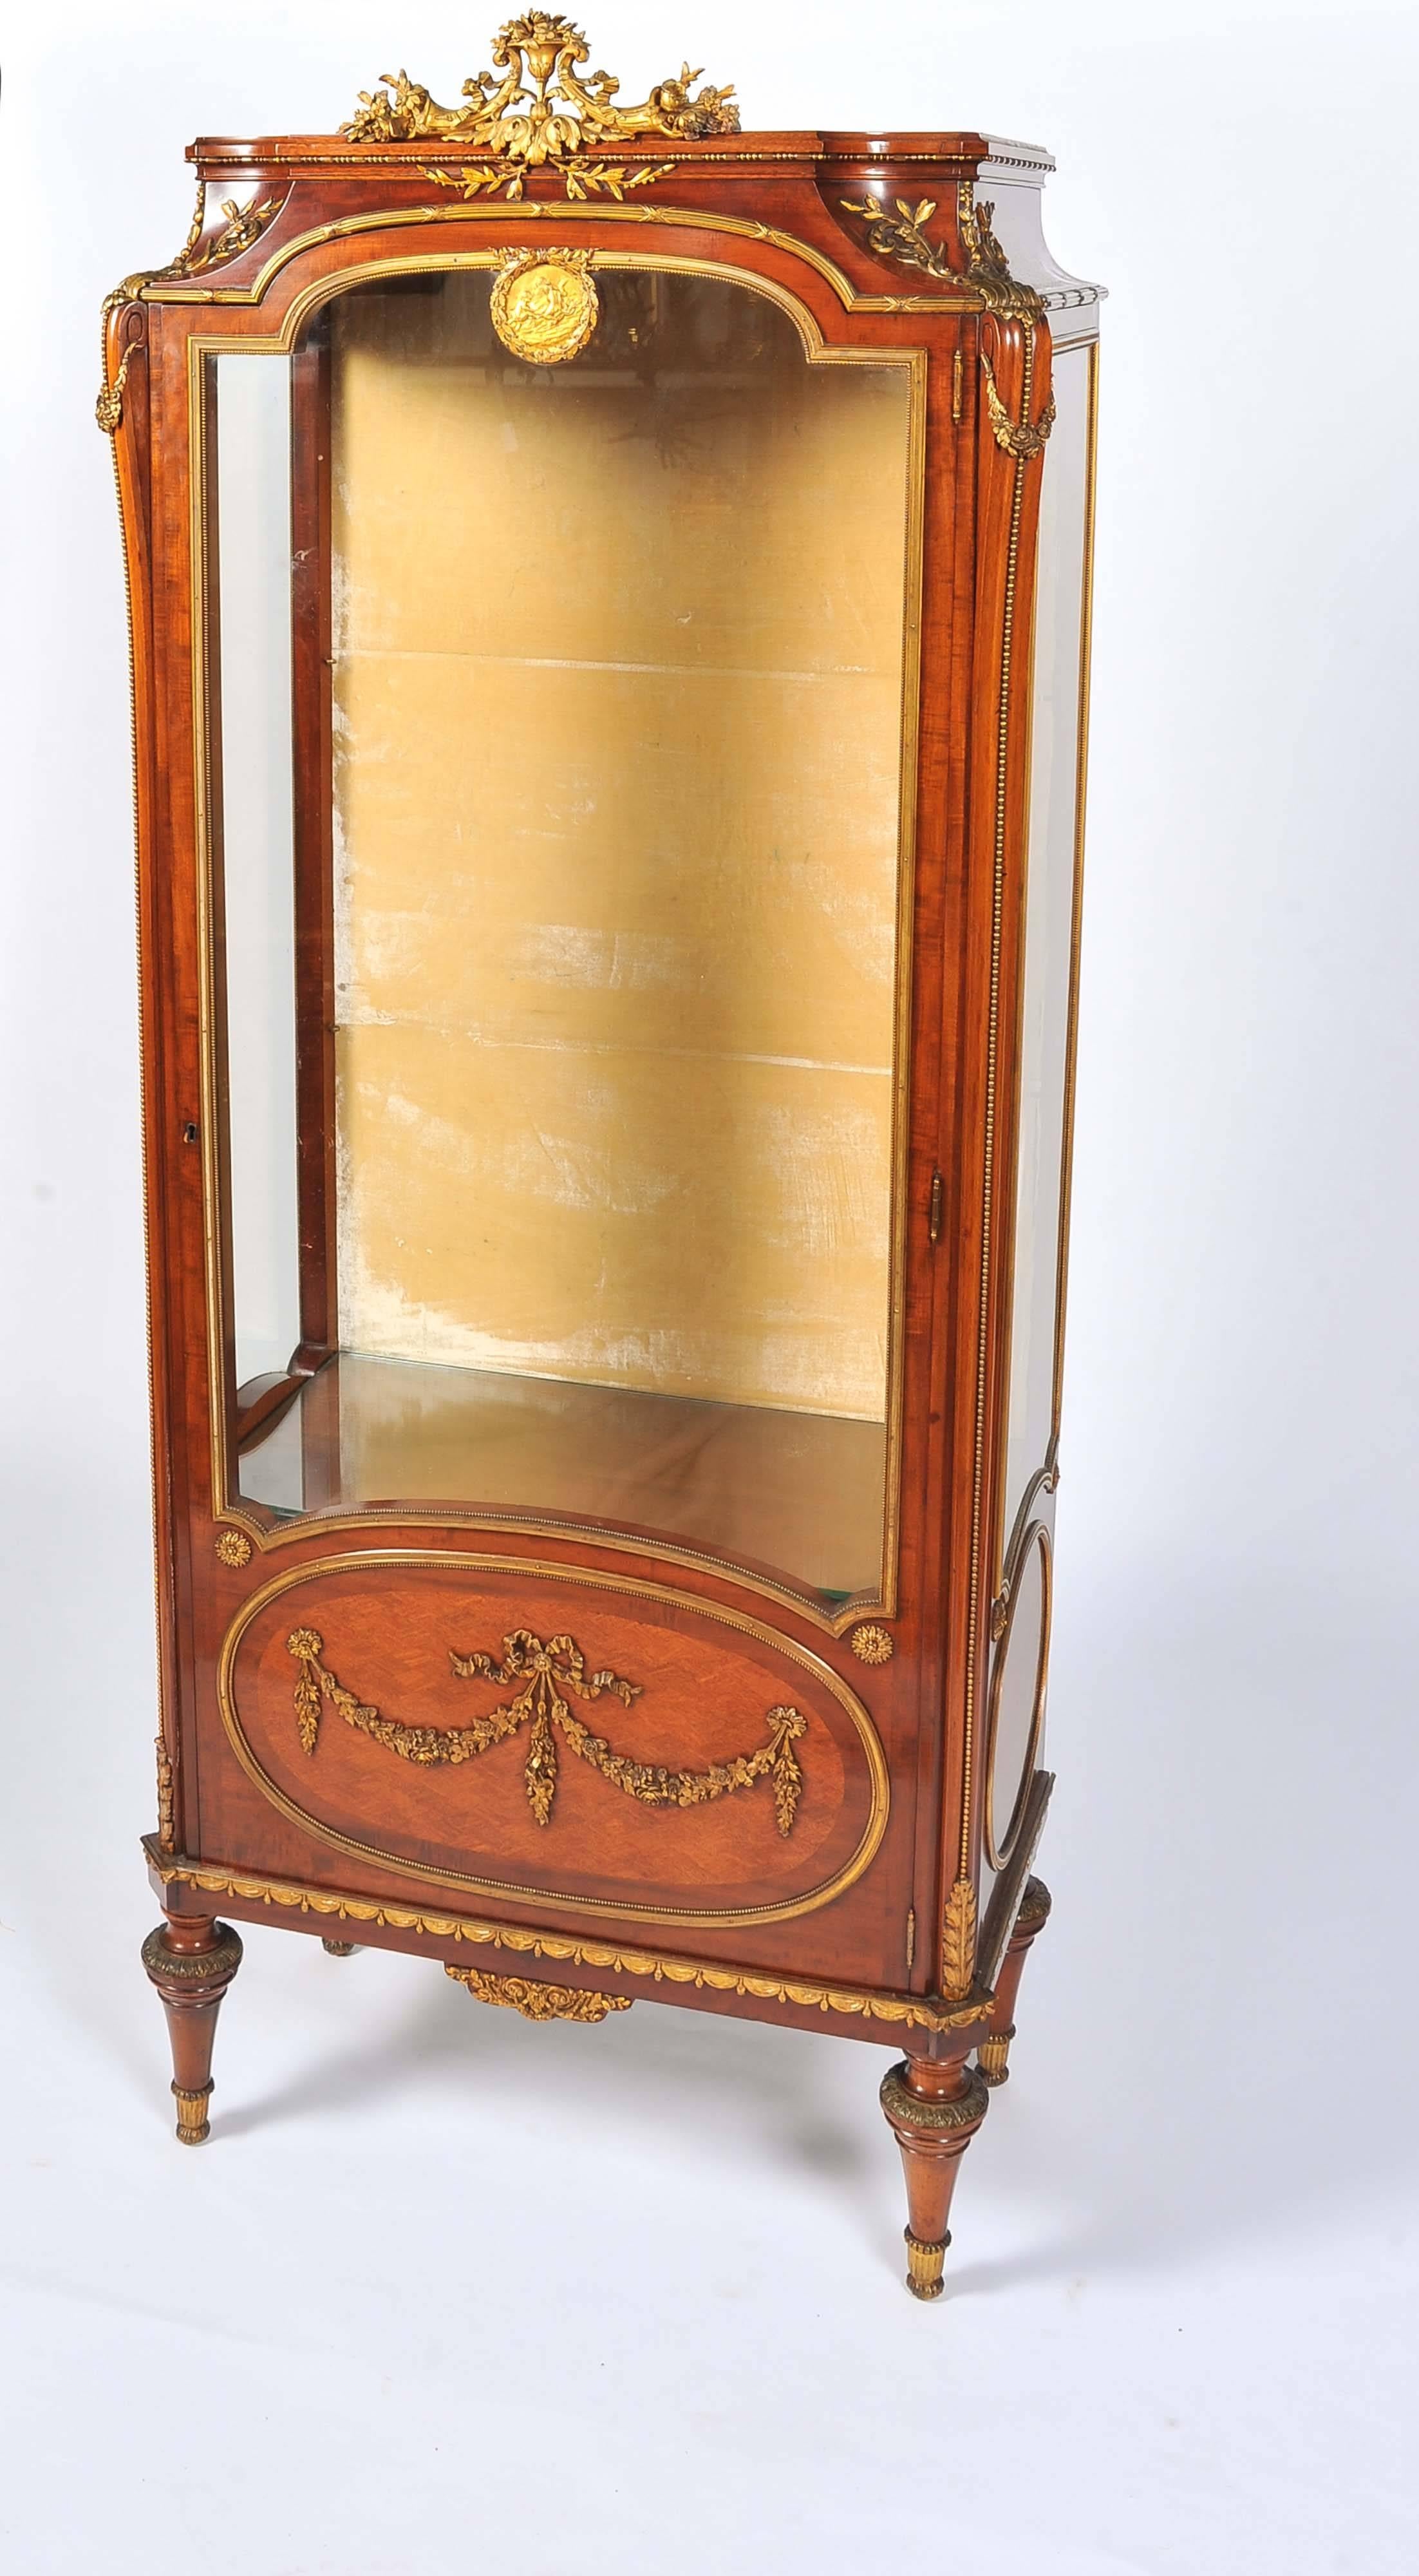 A fine quality French 19th century Kingwood vitrine, having ormolu swags and drapes. parquetry inlaid panel to the door and adjustable glass shelves.